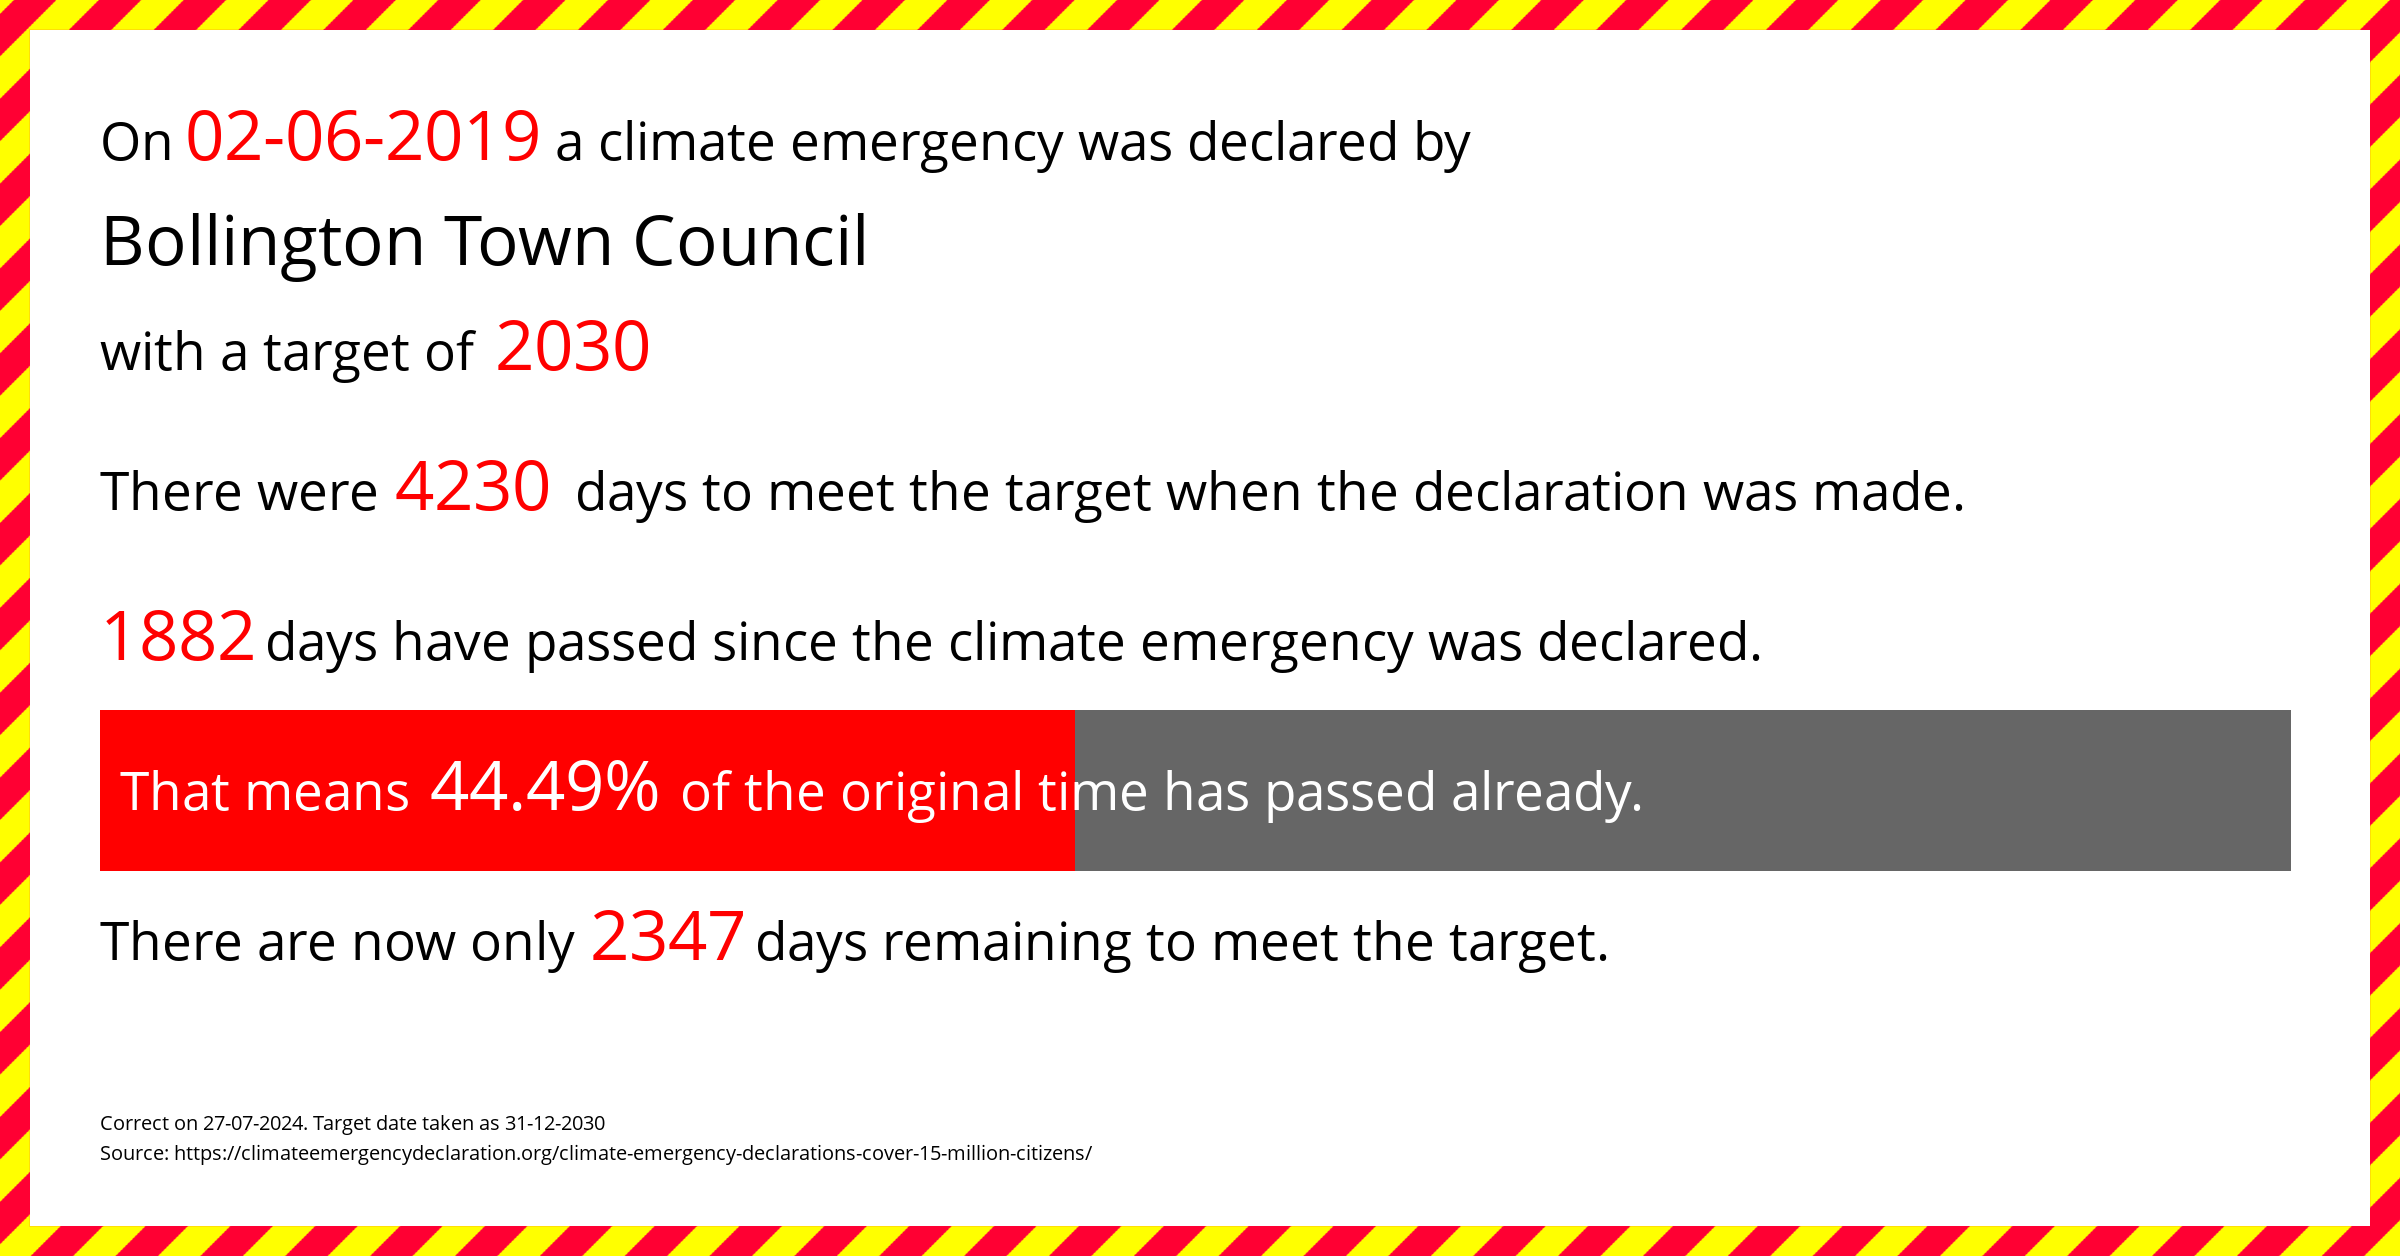 Bollington Town Council declared a Climate emergency on Sunday 2nd June 2019, with a target of 2030.